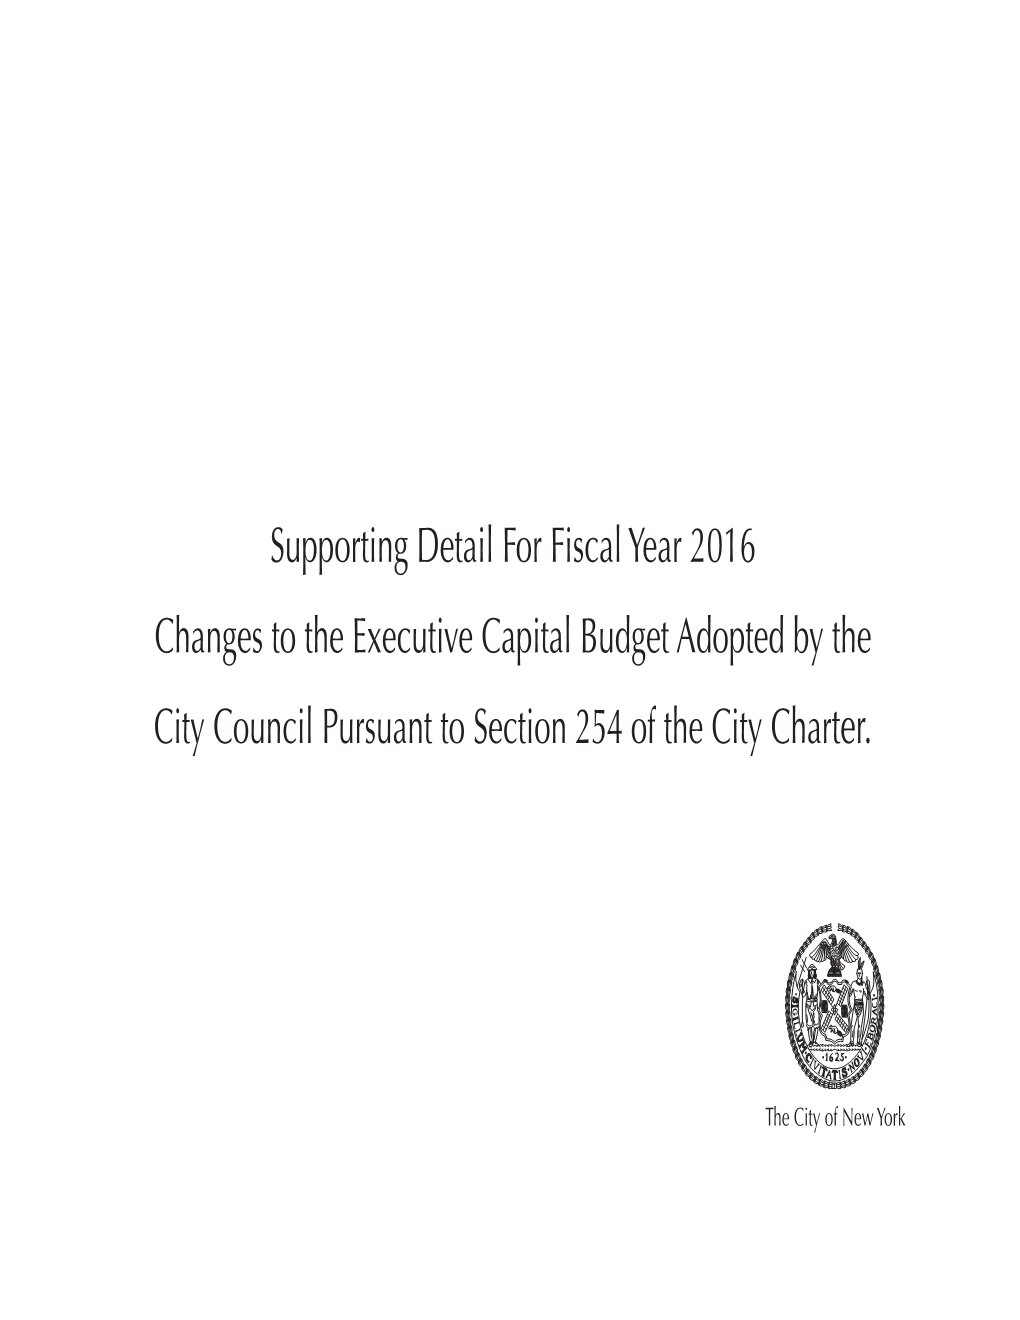 Supporting Detail for Fiscal Year 2016 Changes to the Executive Capital Budget Adopted by the City Council Pursuant to Section 254 of the City Charter